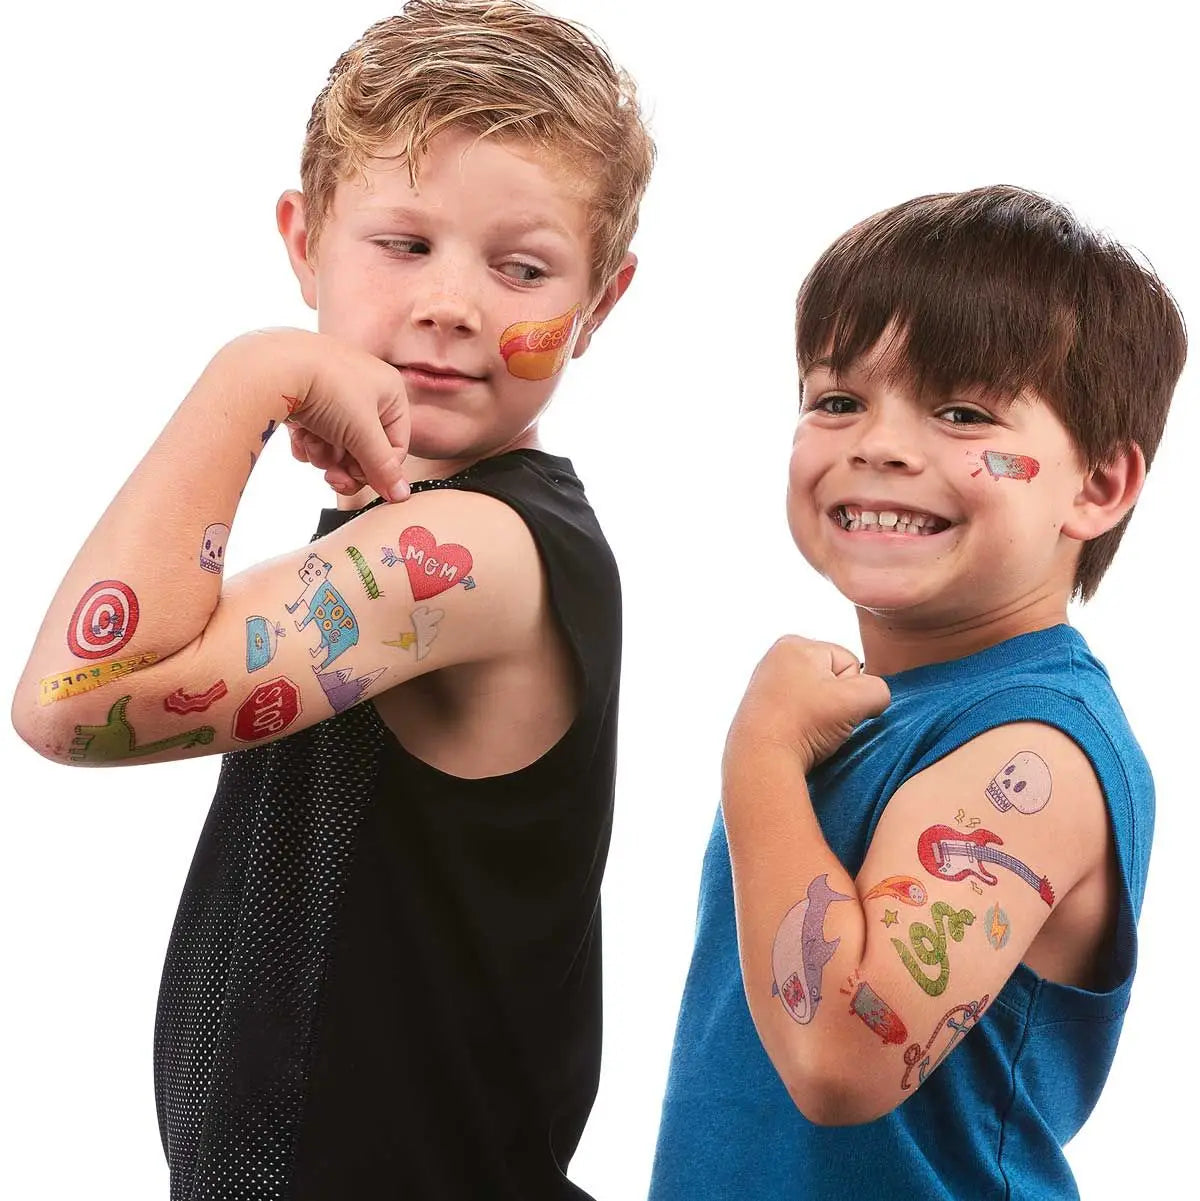 Tattoos and Physical Therapy: A View on Body Art in the Healthcare Setting  | Regis University – School of Physical Therapy